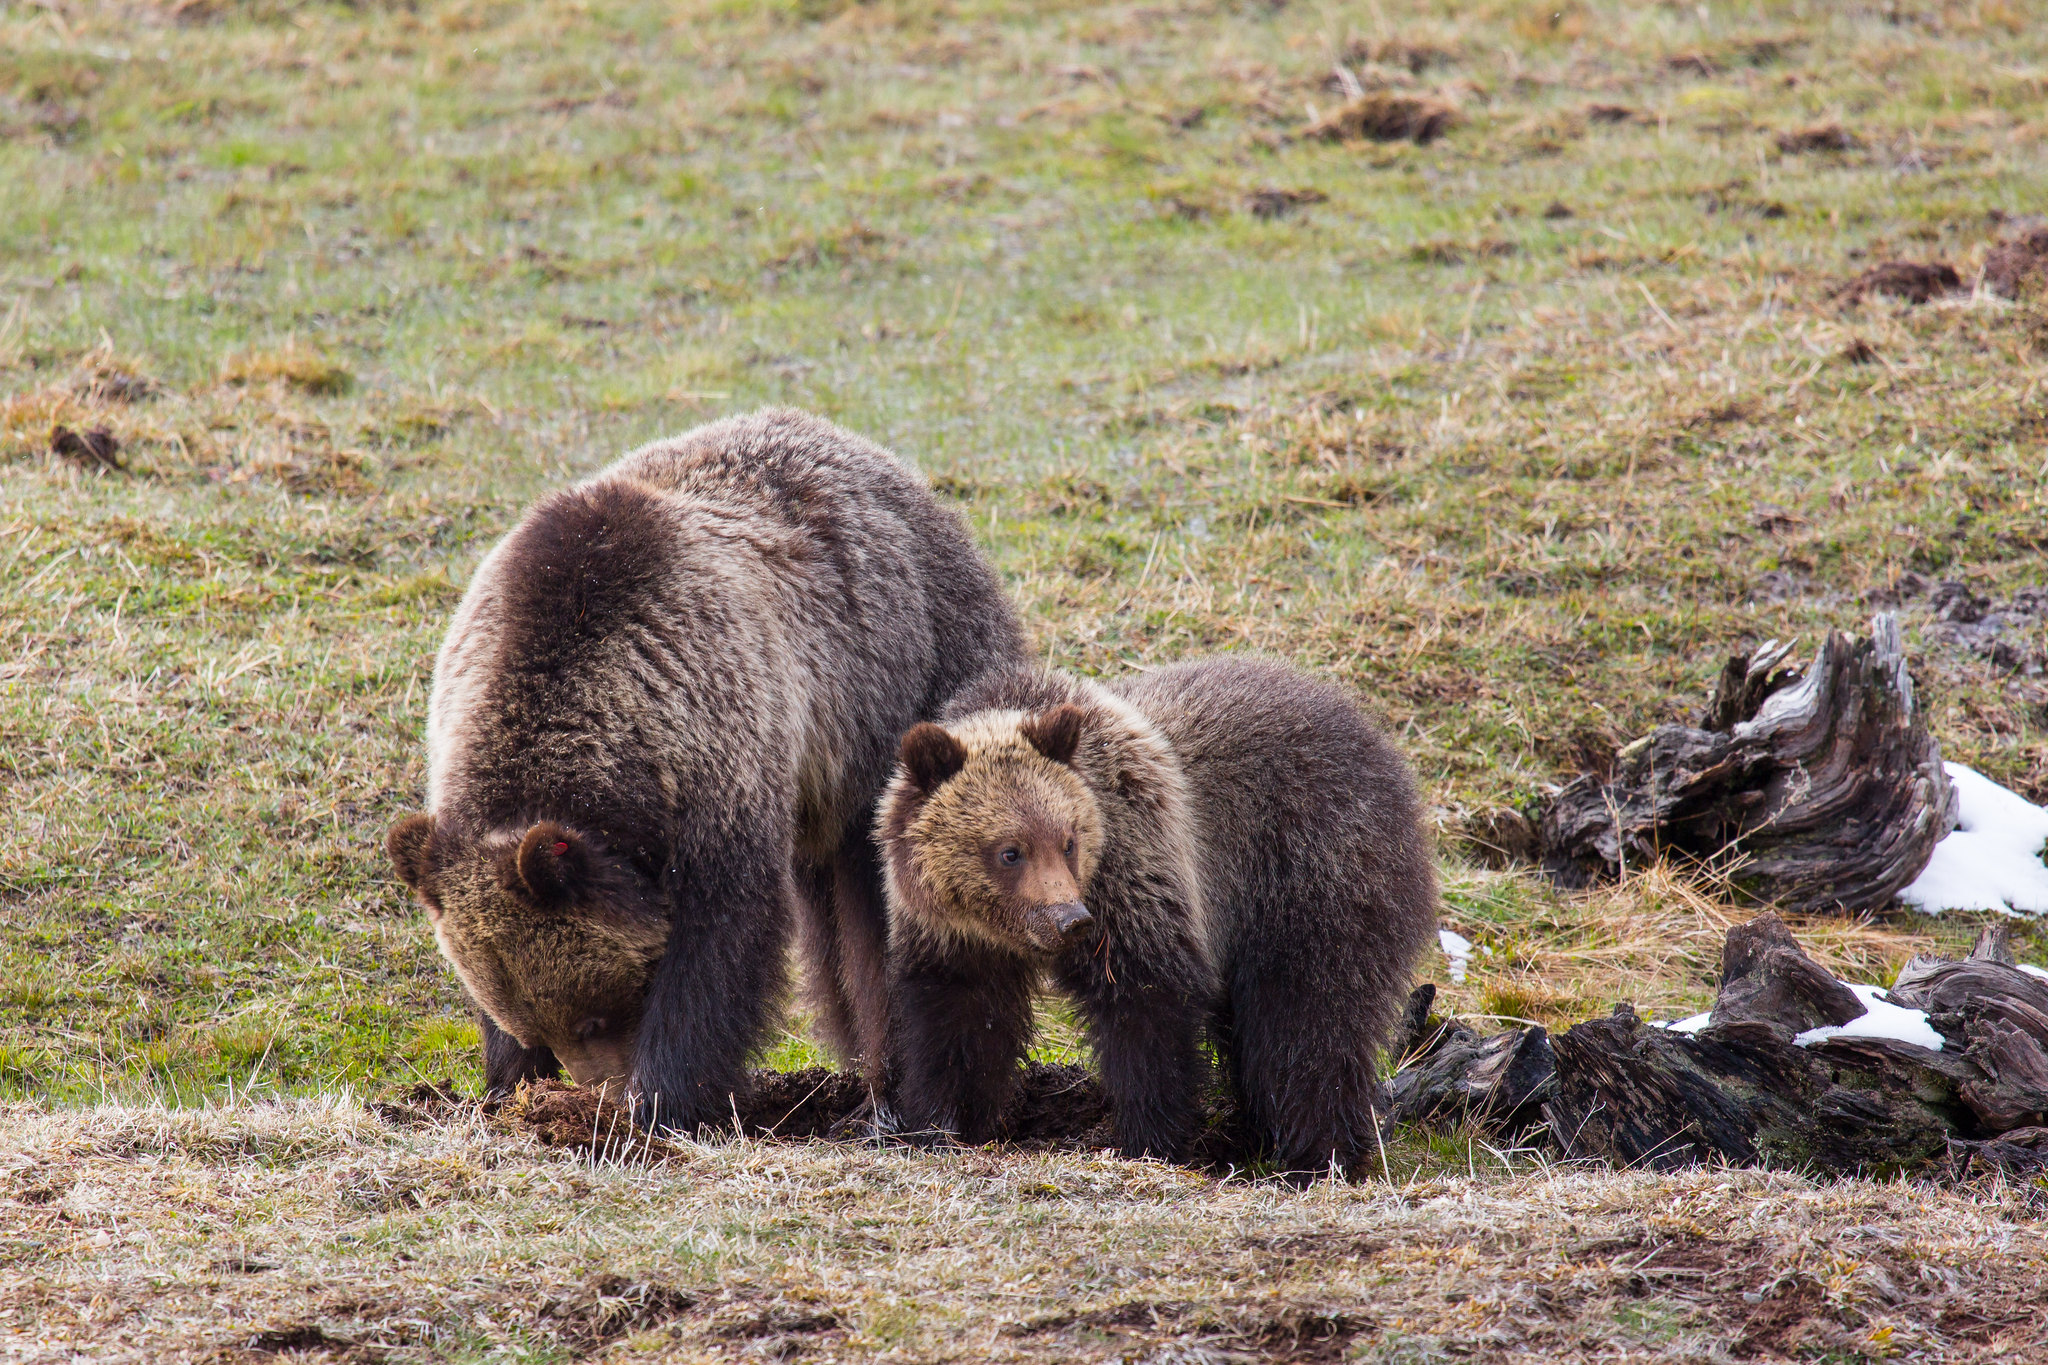 Grizzly sow & yearling cub, Roaring Mountain